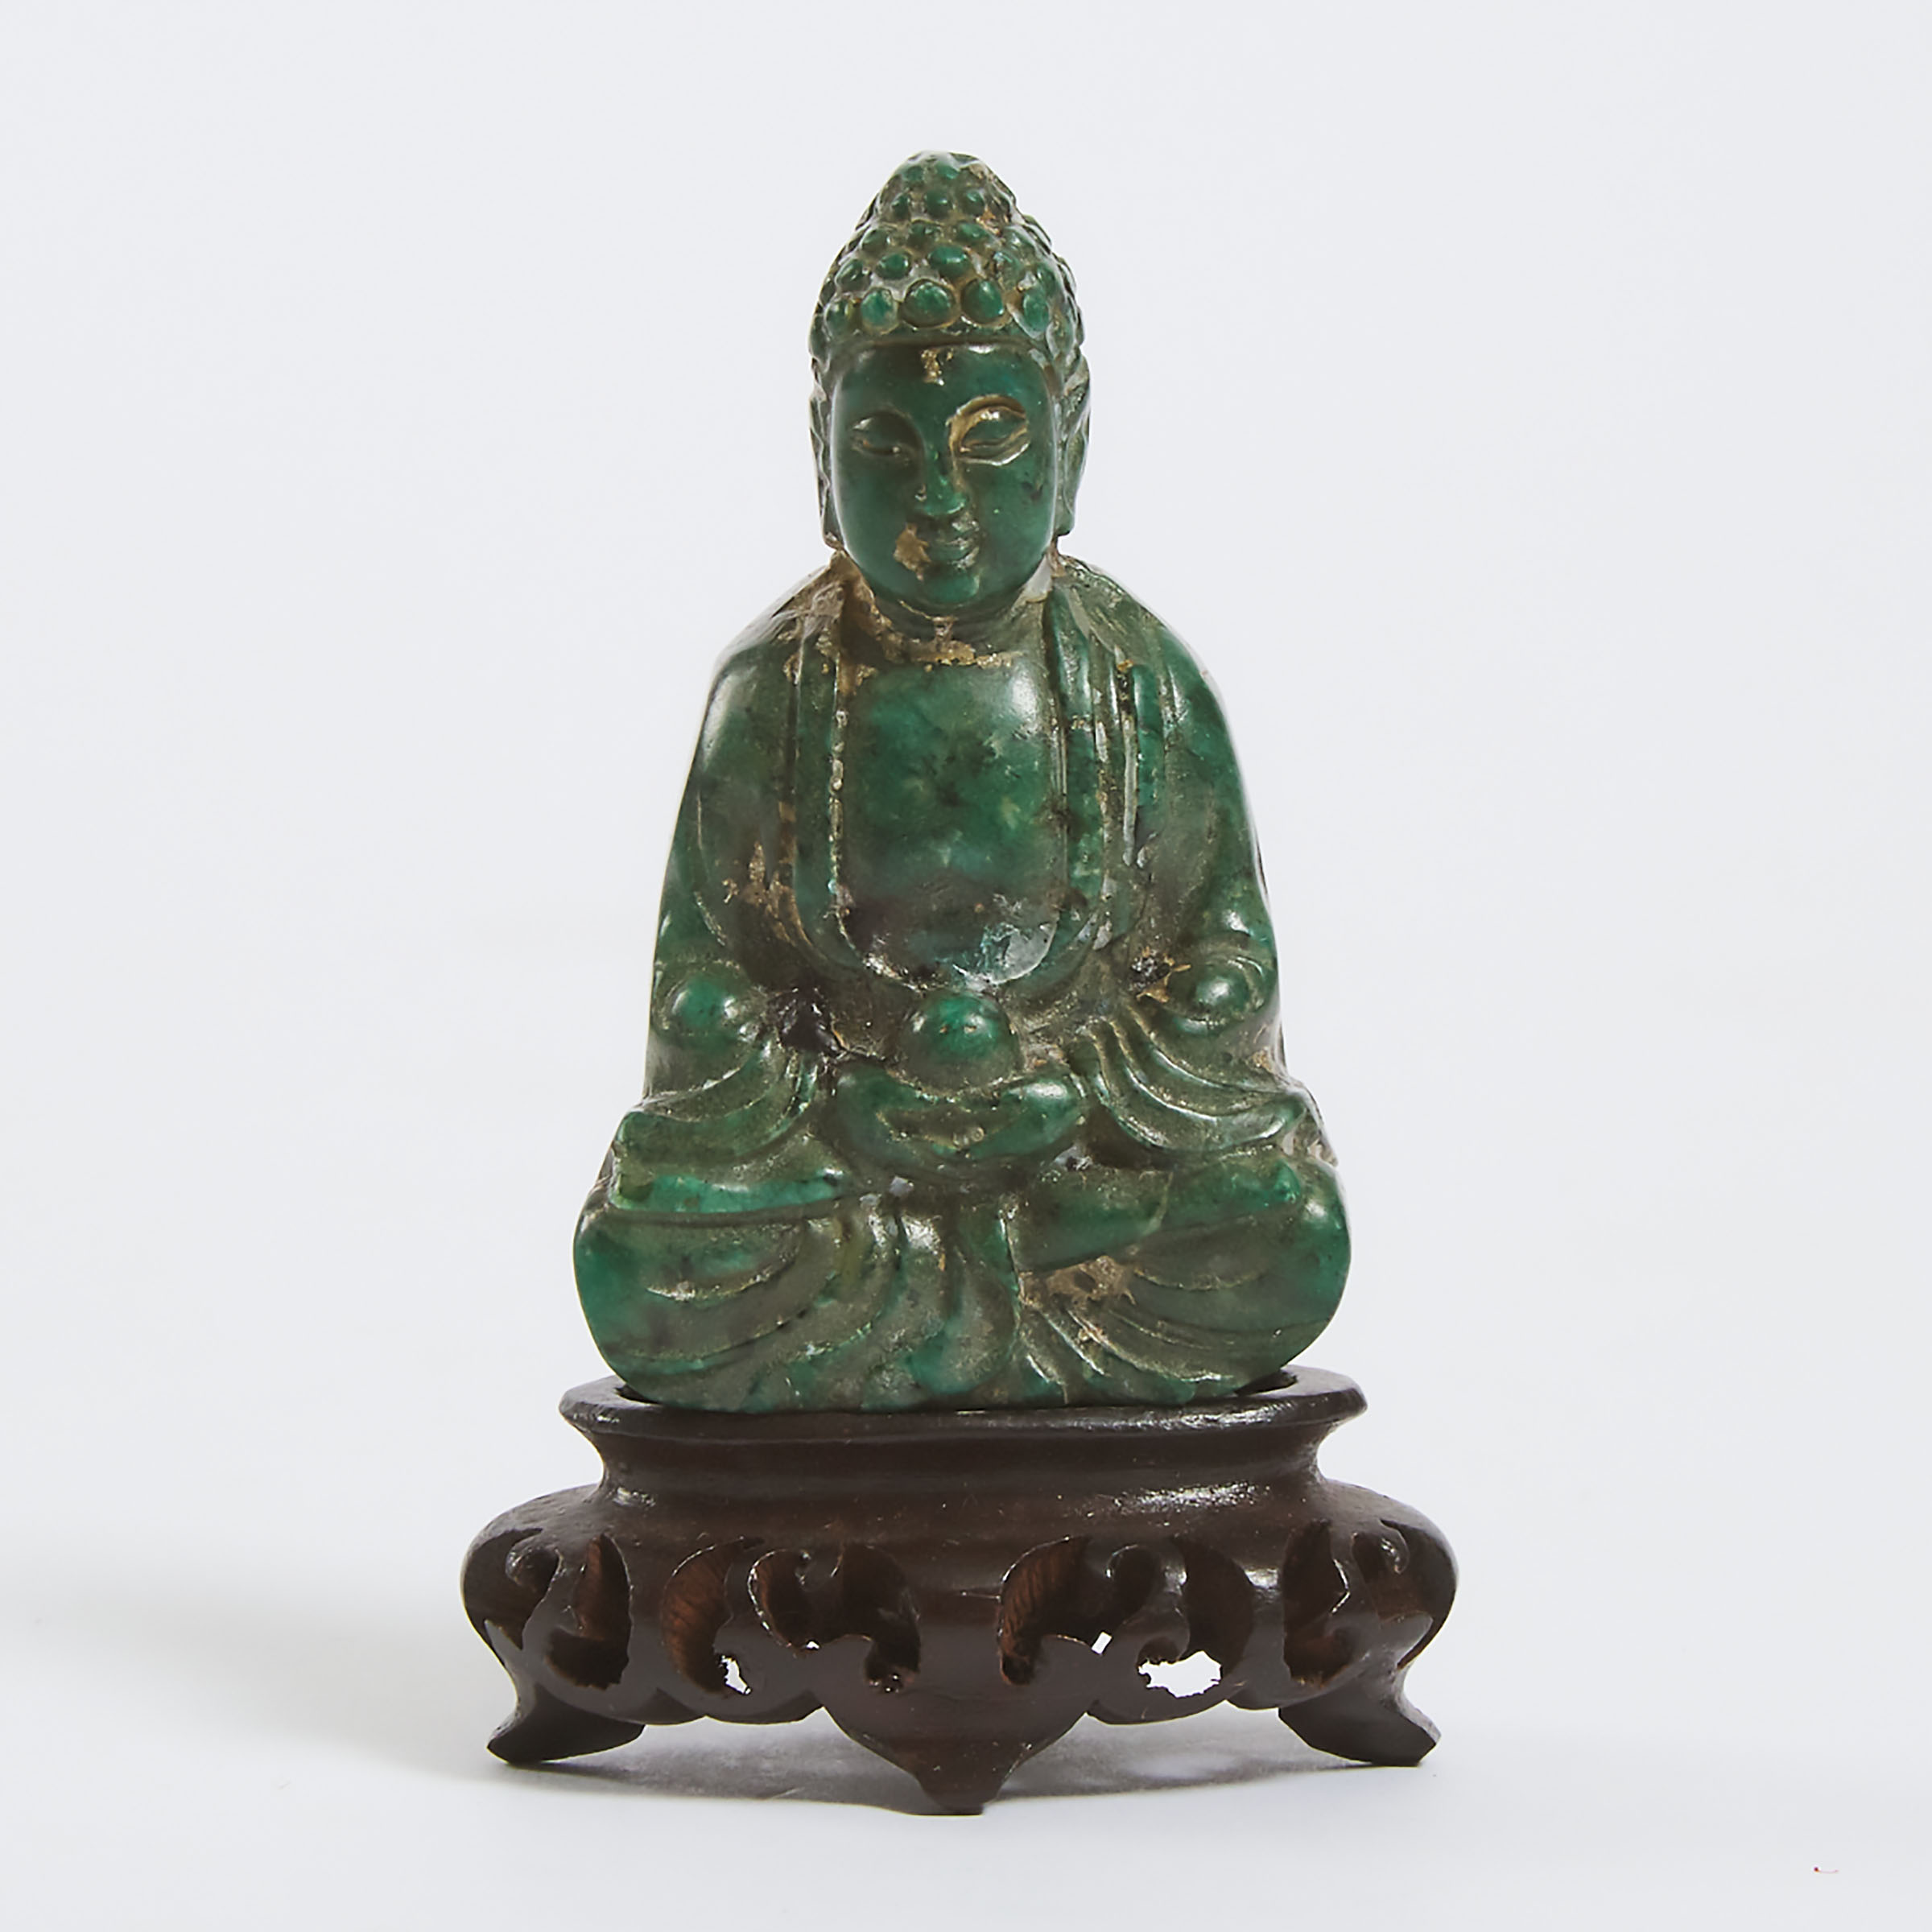 A Small Chinese Turquoise Carved Shakyamuni Pendant, Early 20th Century